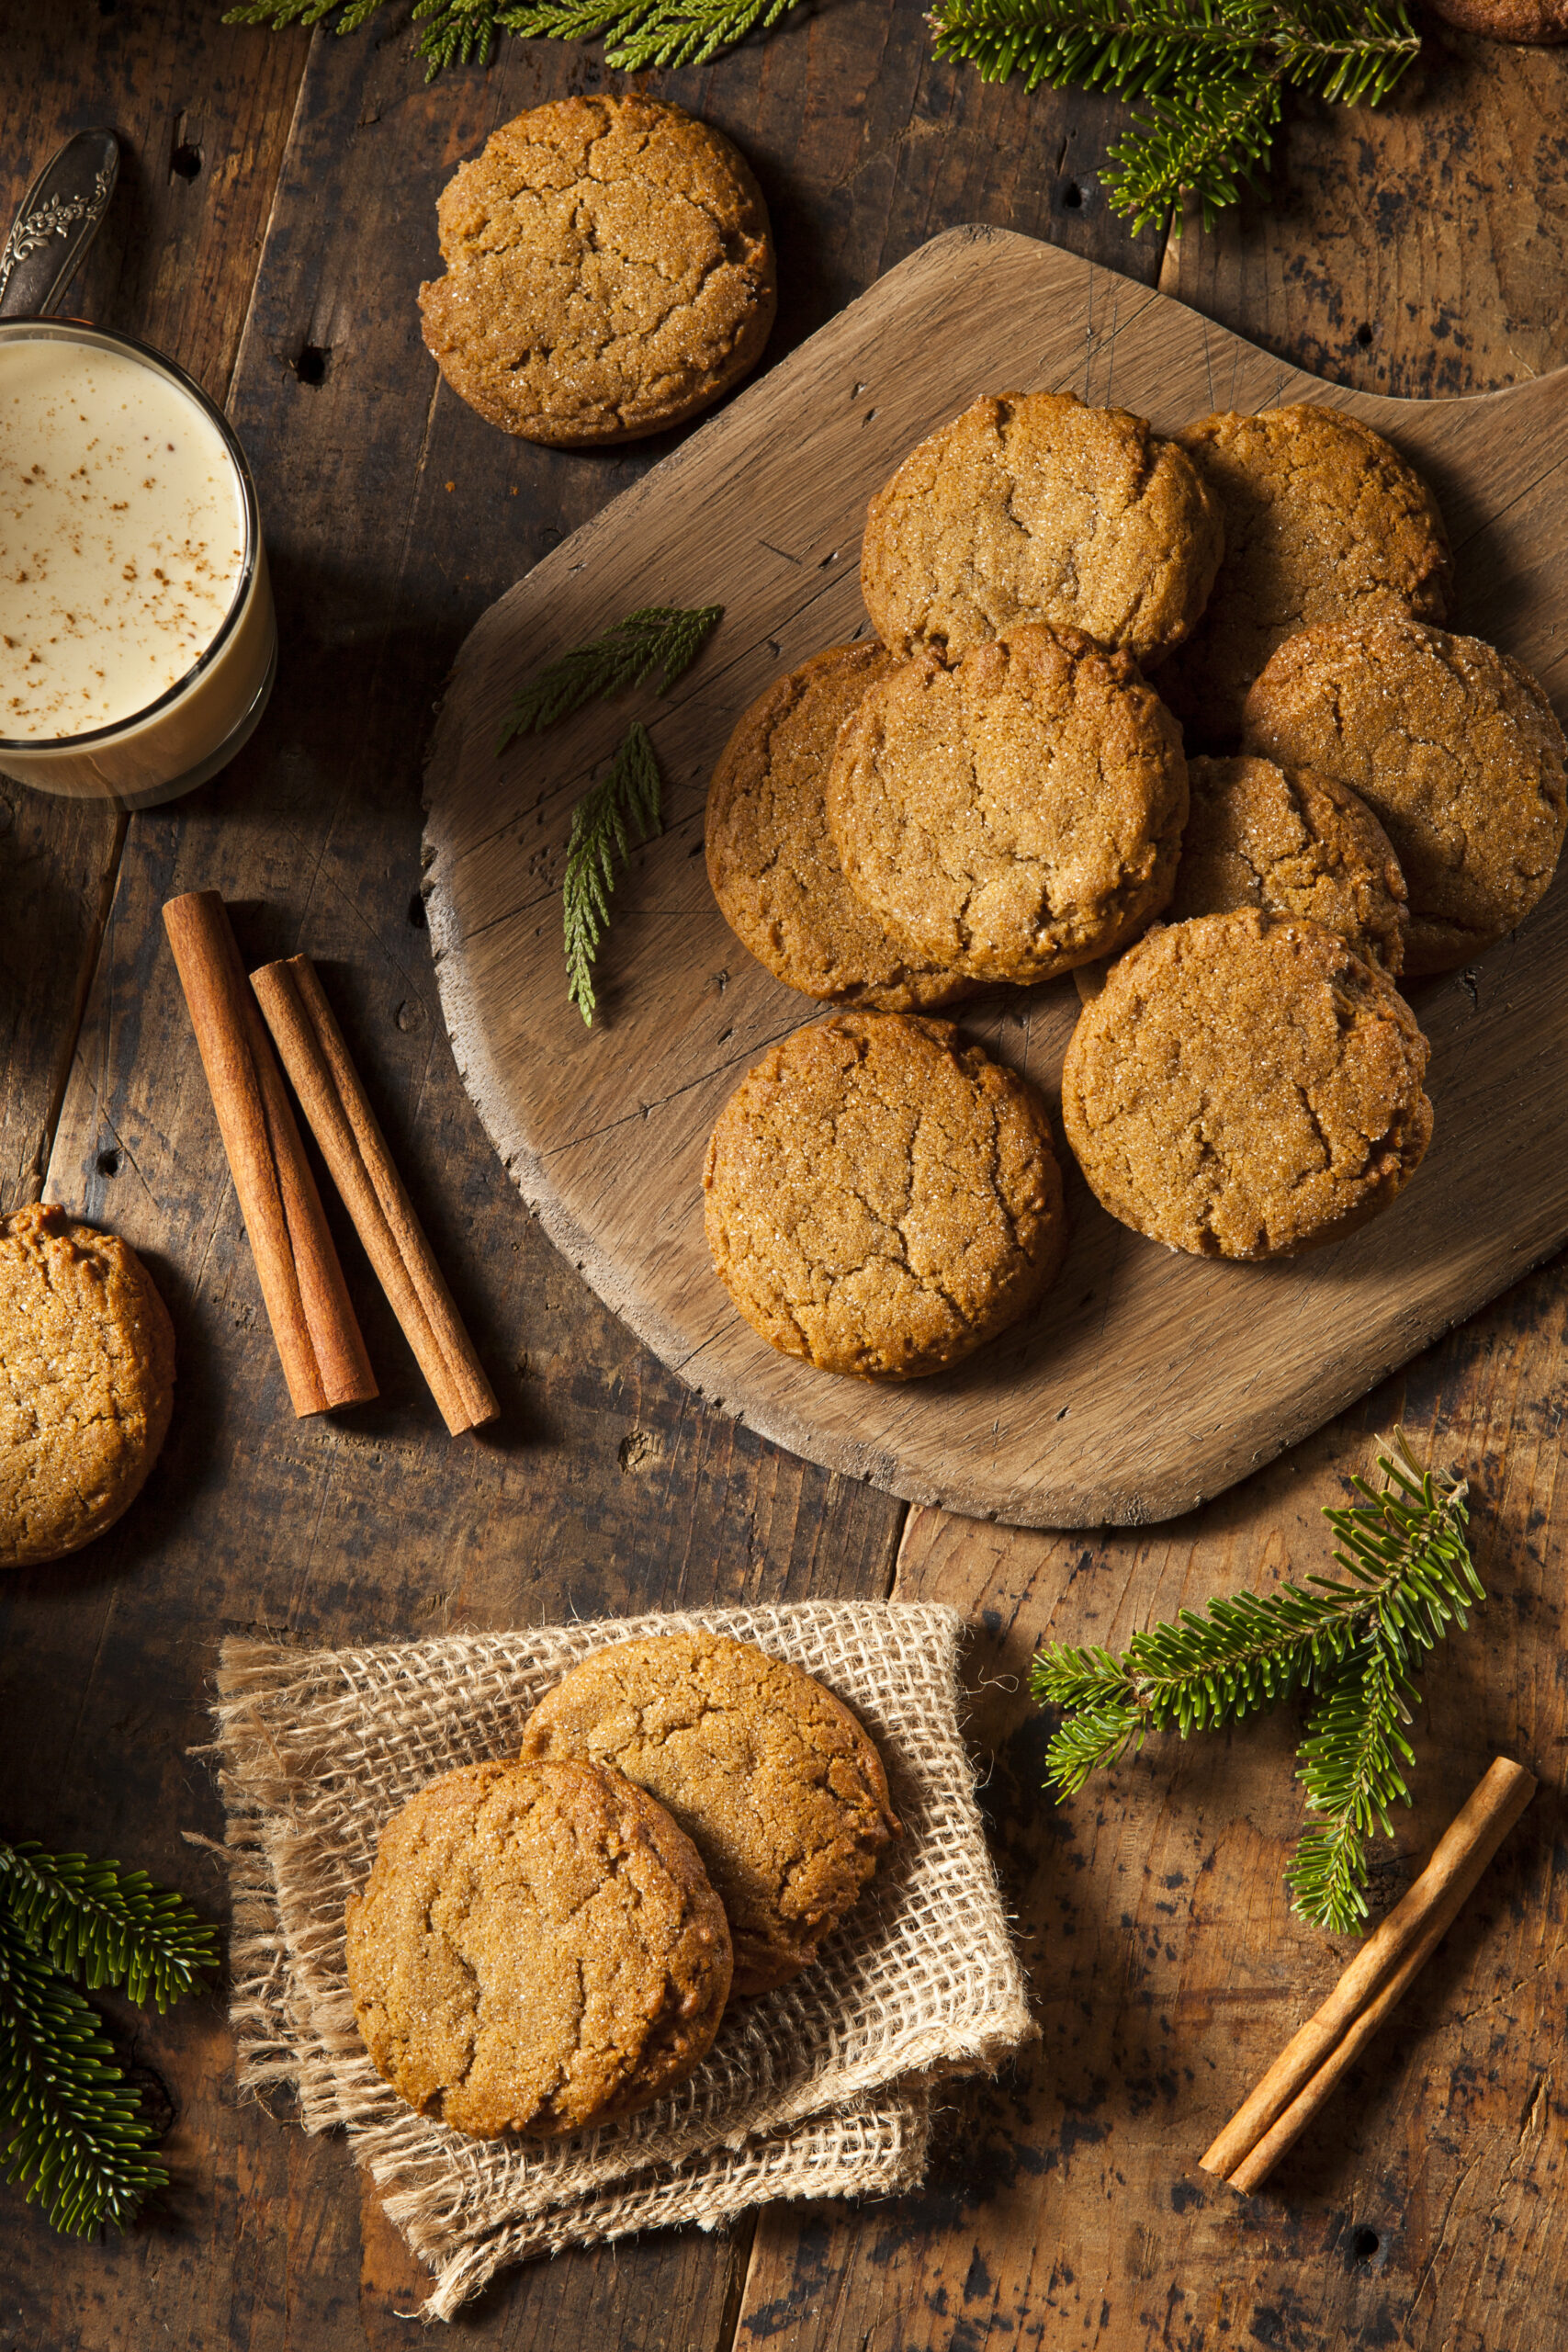 Discover the joy of baking with my Homemade Brown Gingersnap Cookies recipe. These delightful, easy-to-make treats are full of sweet and spicy holiday magic.